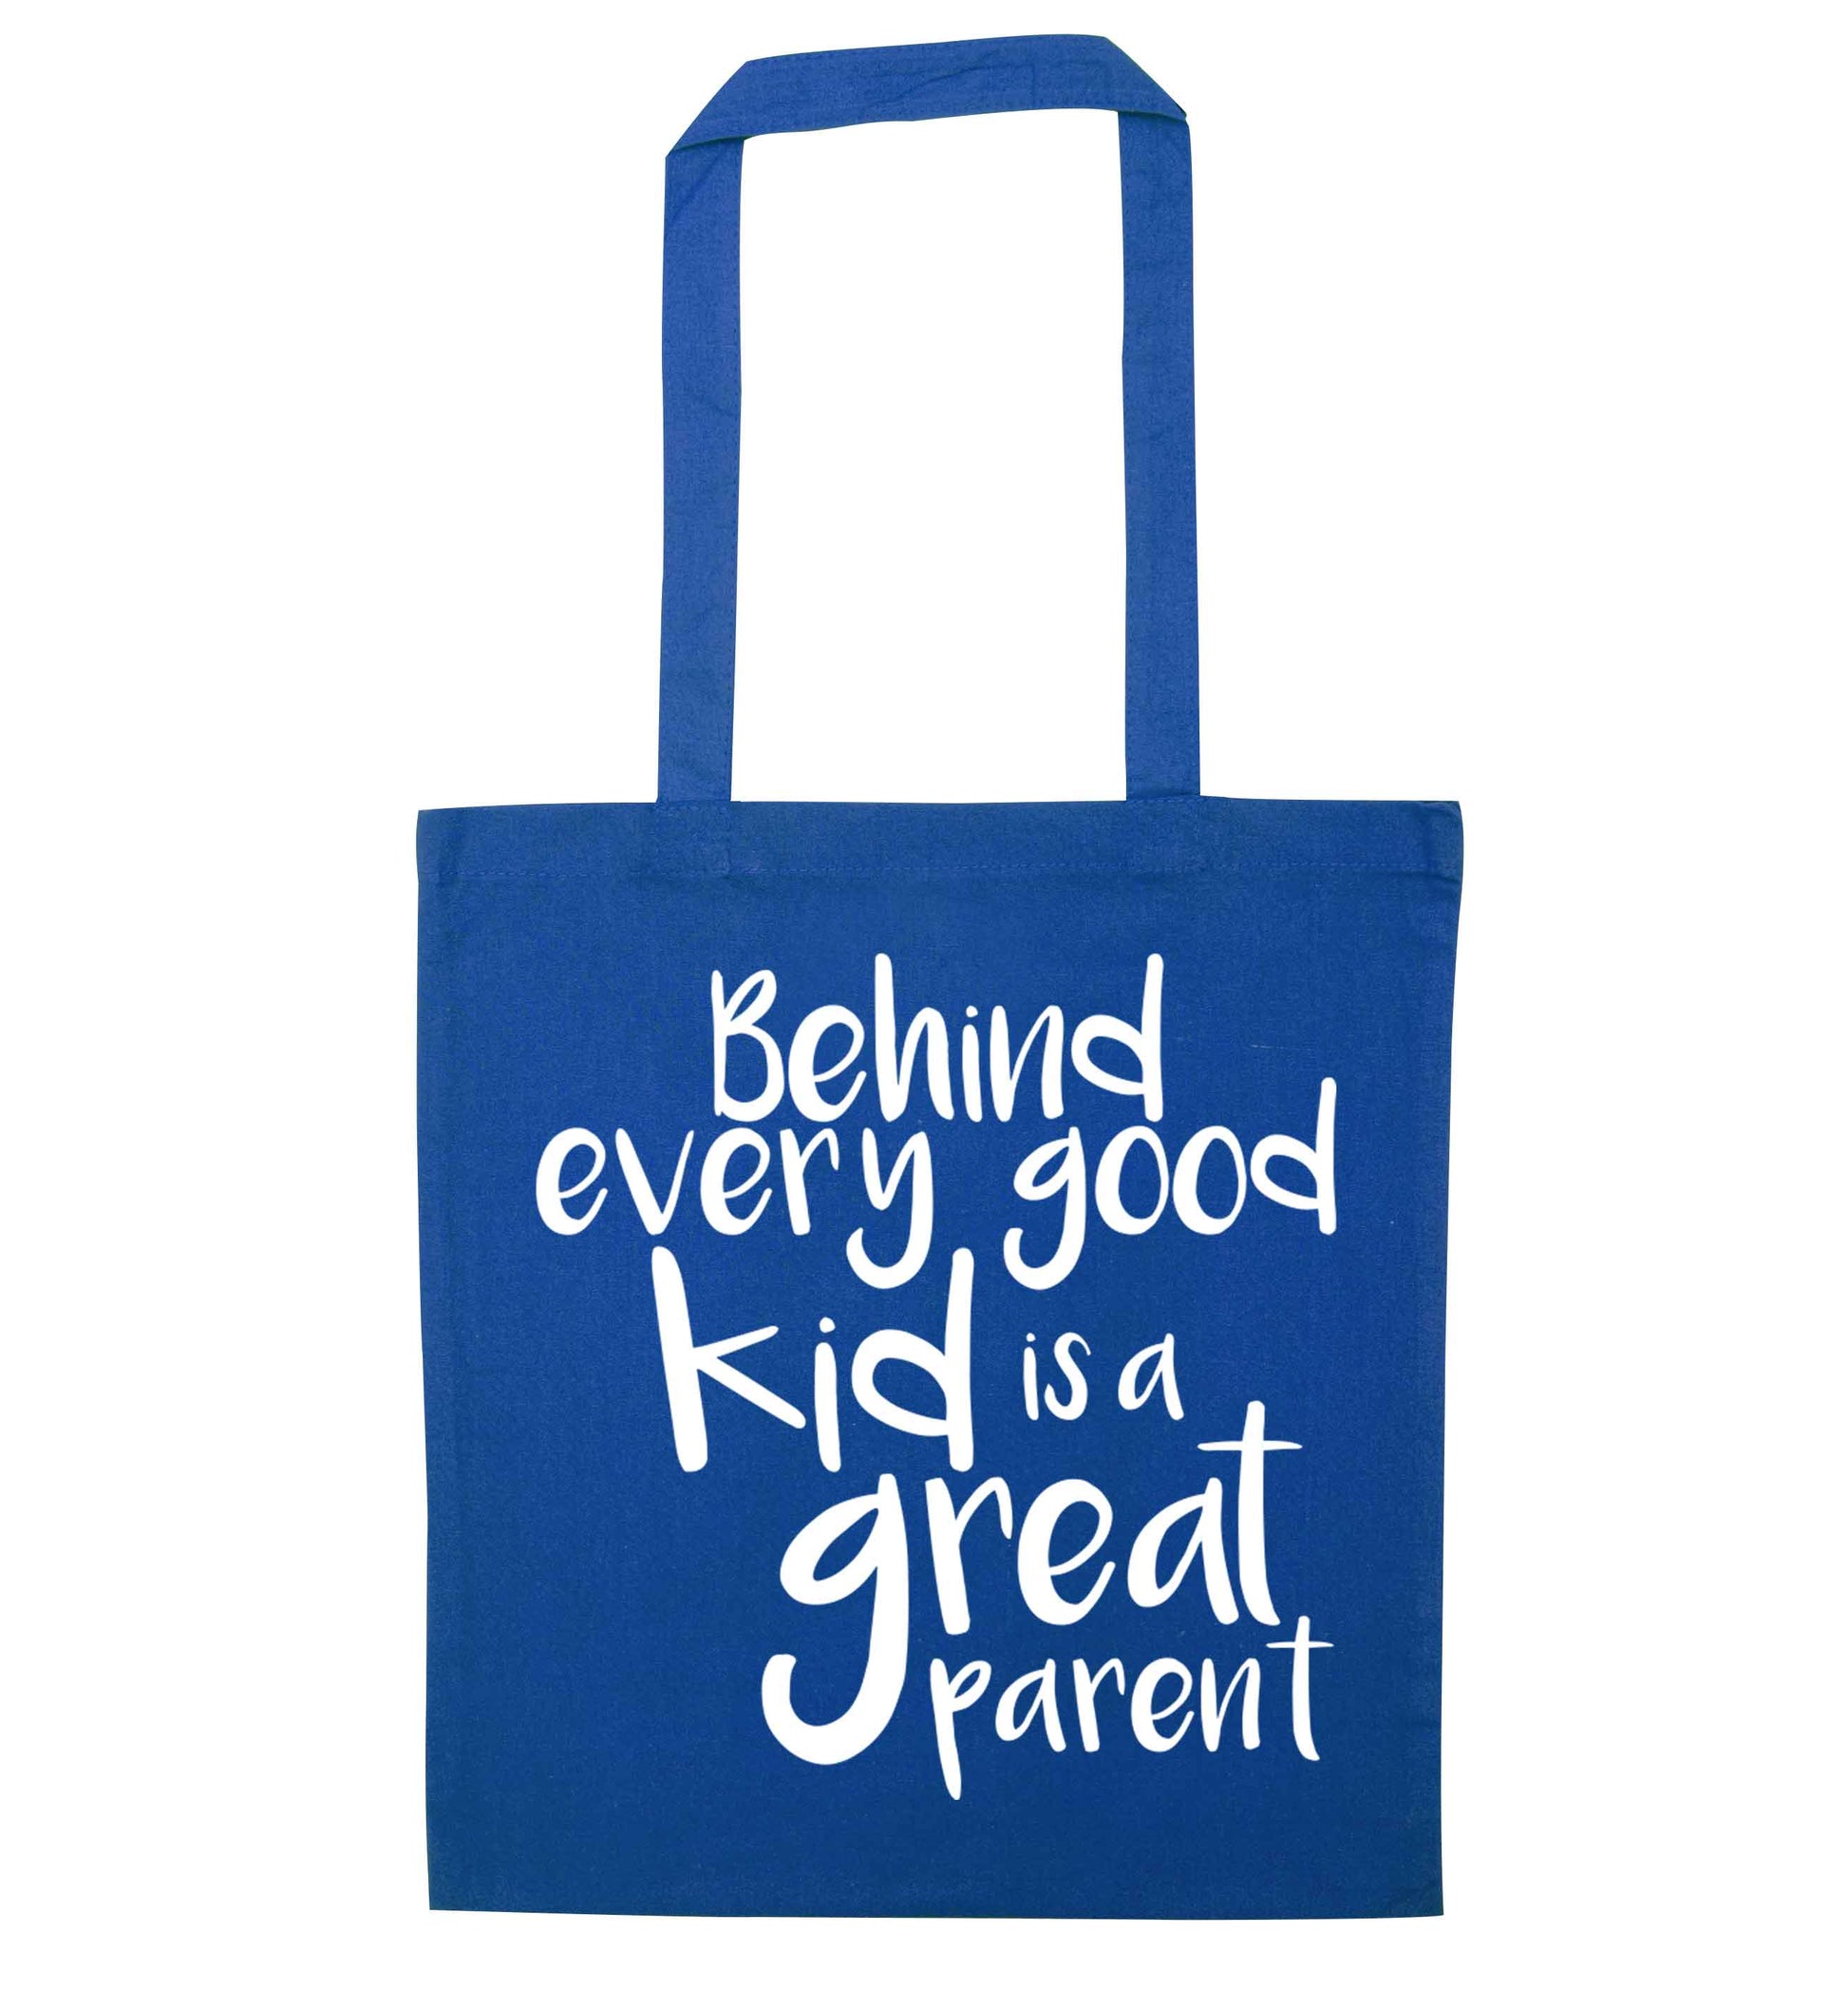 Behind every good kid is a great parent blue tote bag